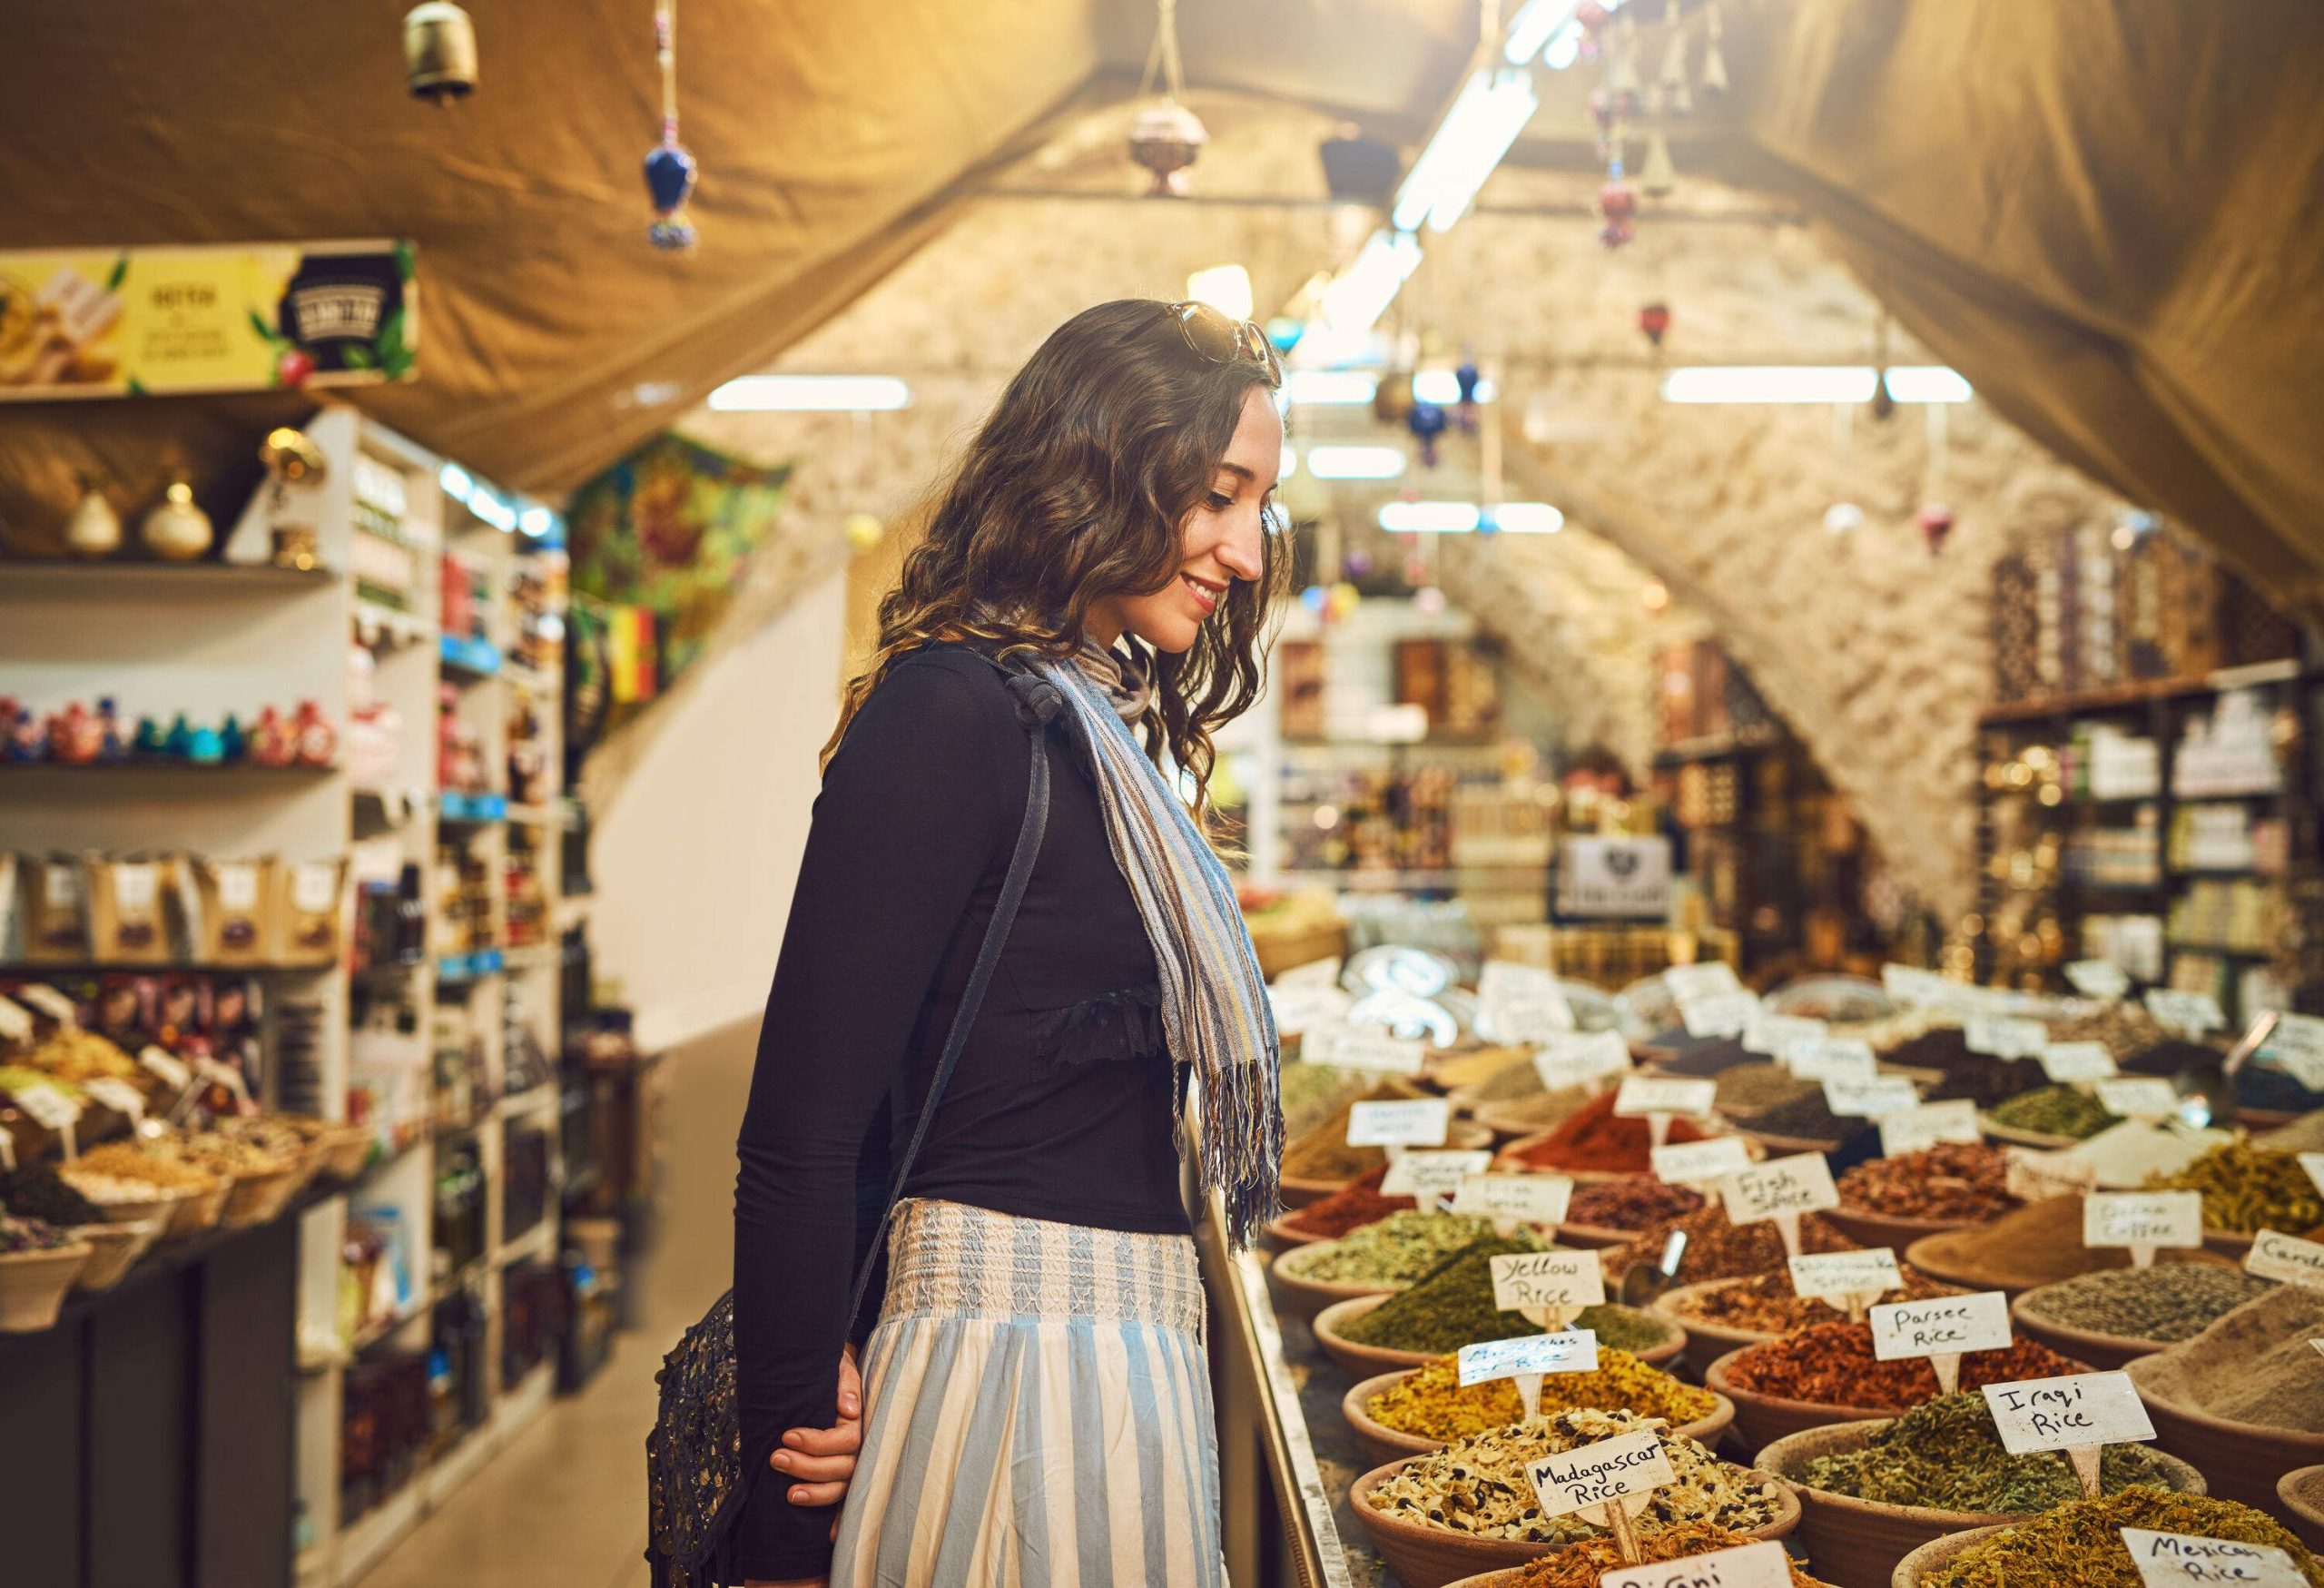 A young lady staring at the spices and herbs displayed in a store.